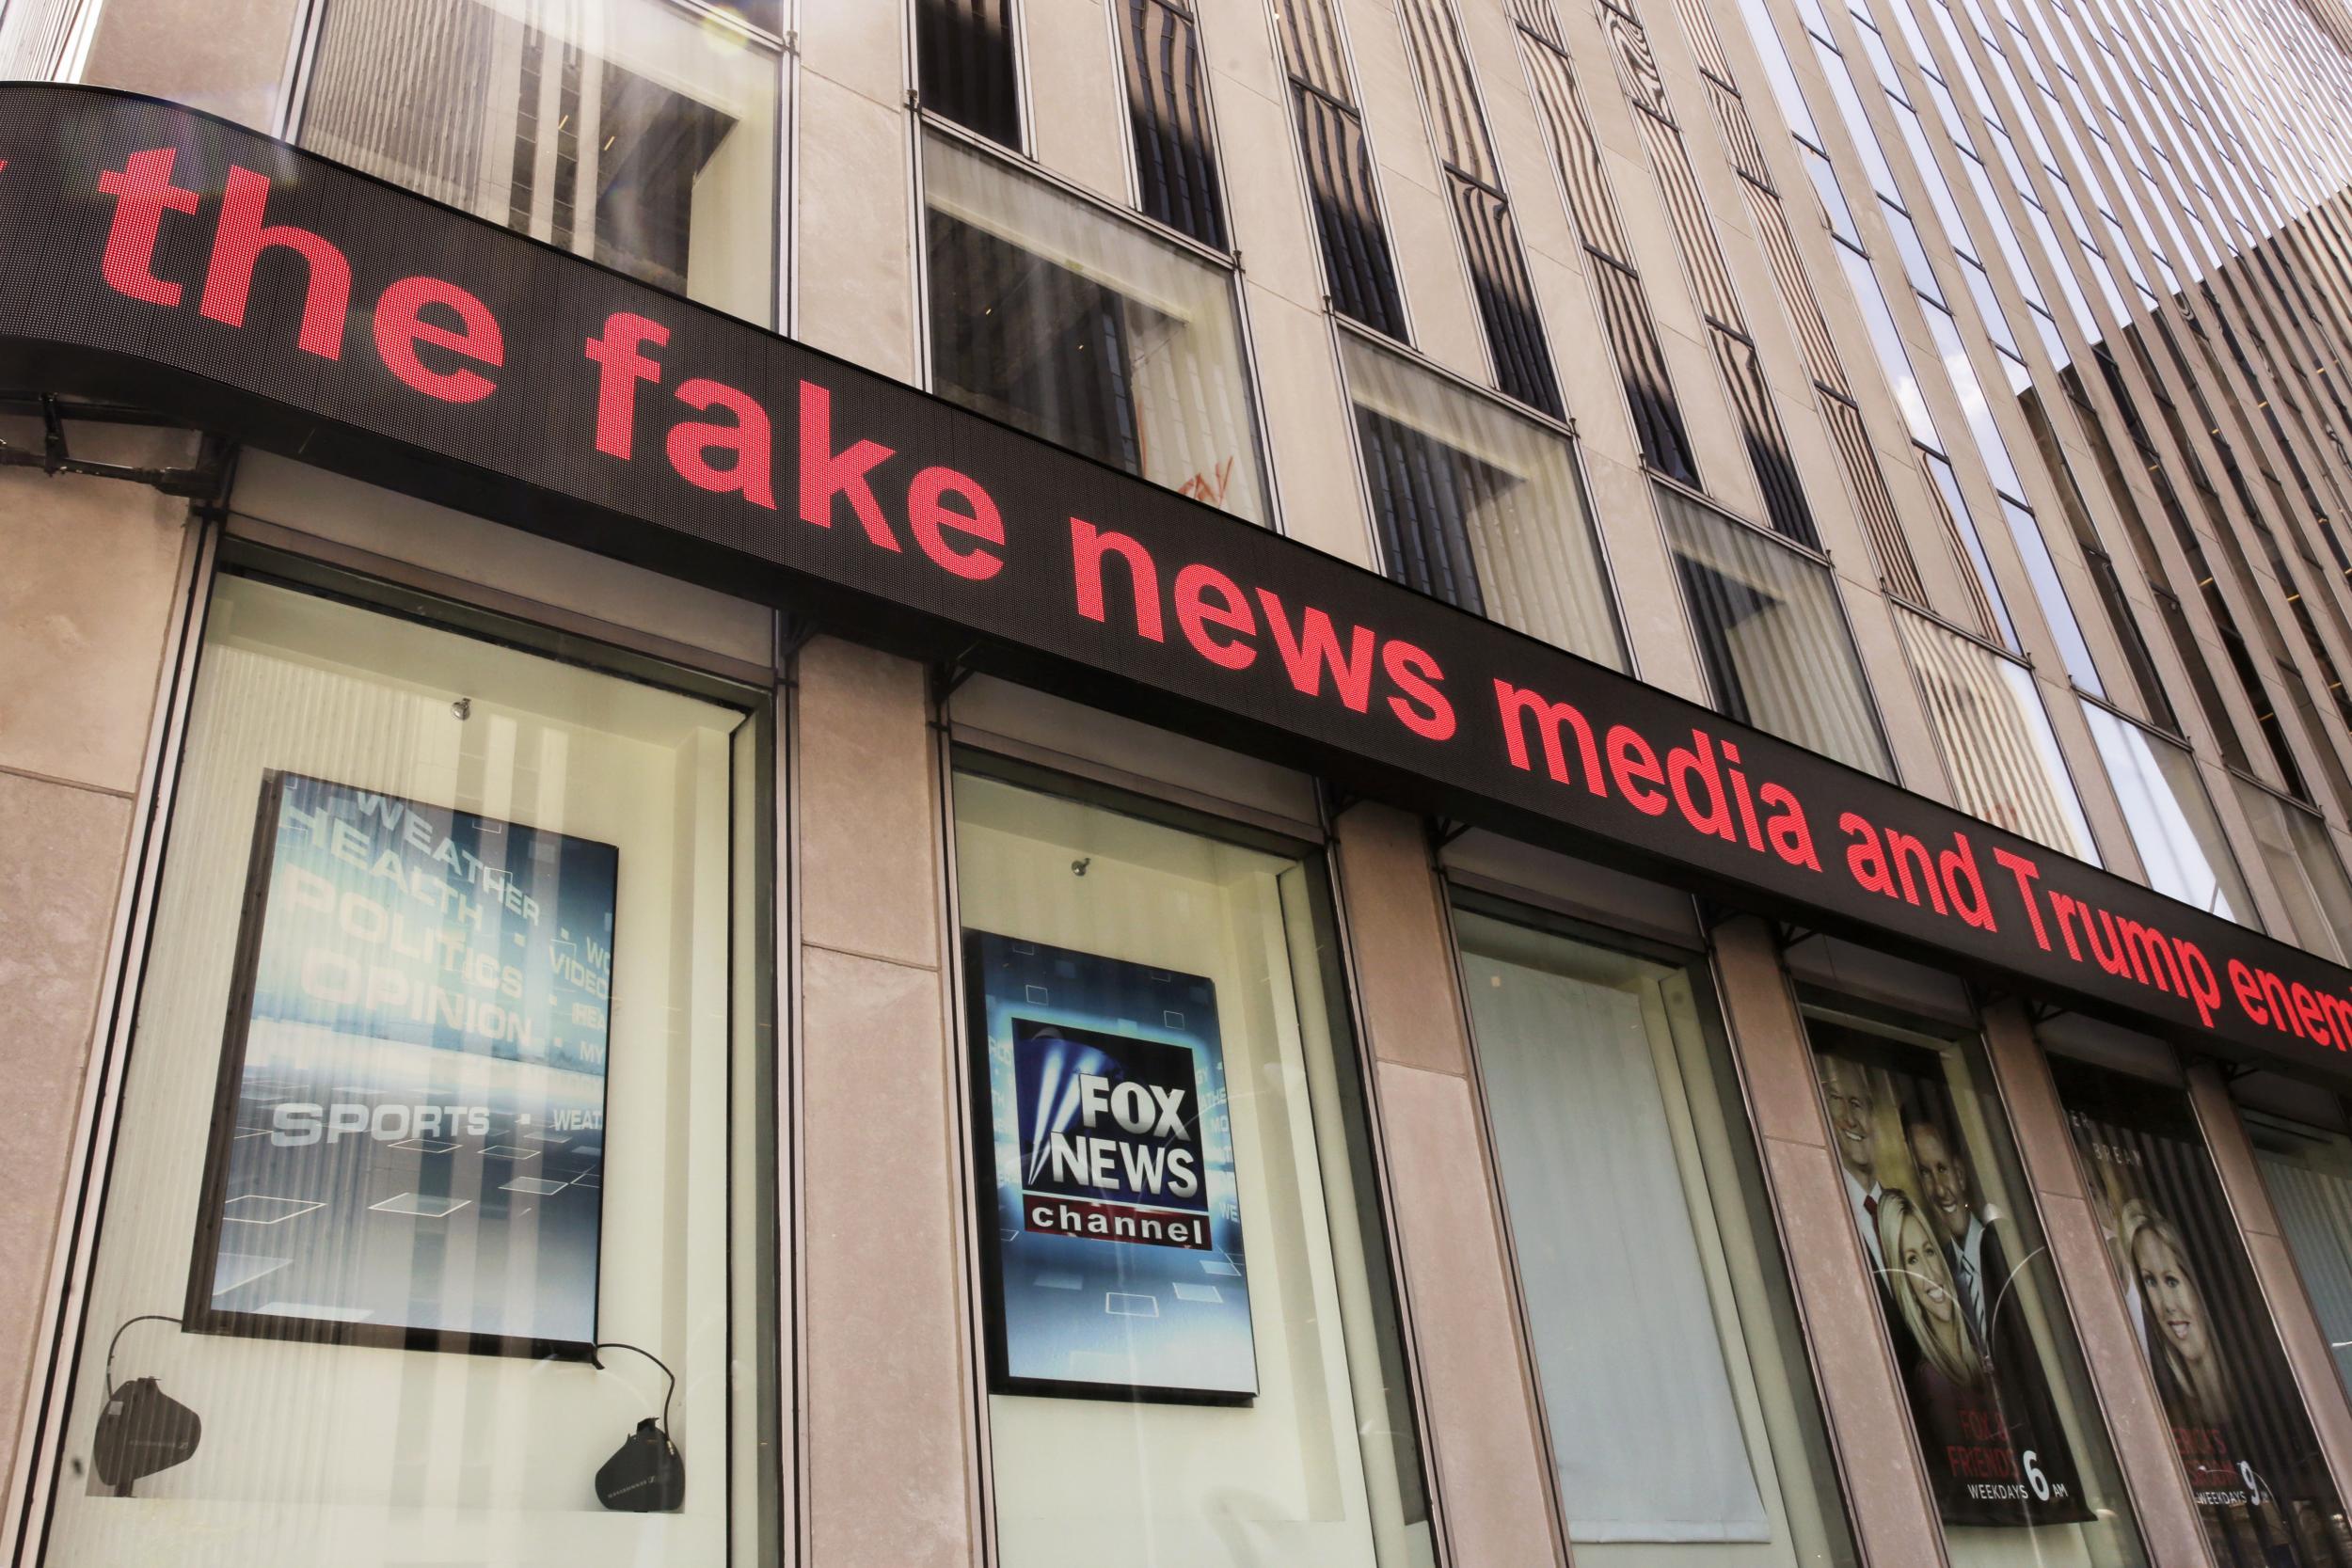 News headlines scroll above the Fox News studios in the News Corporation headquarters building in New York